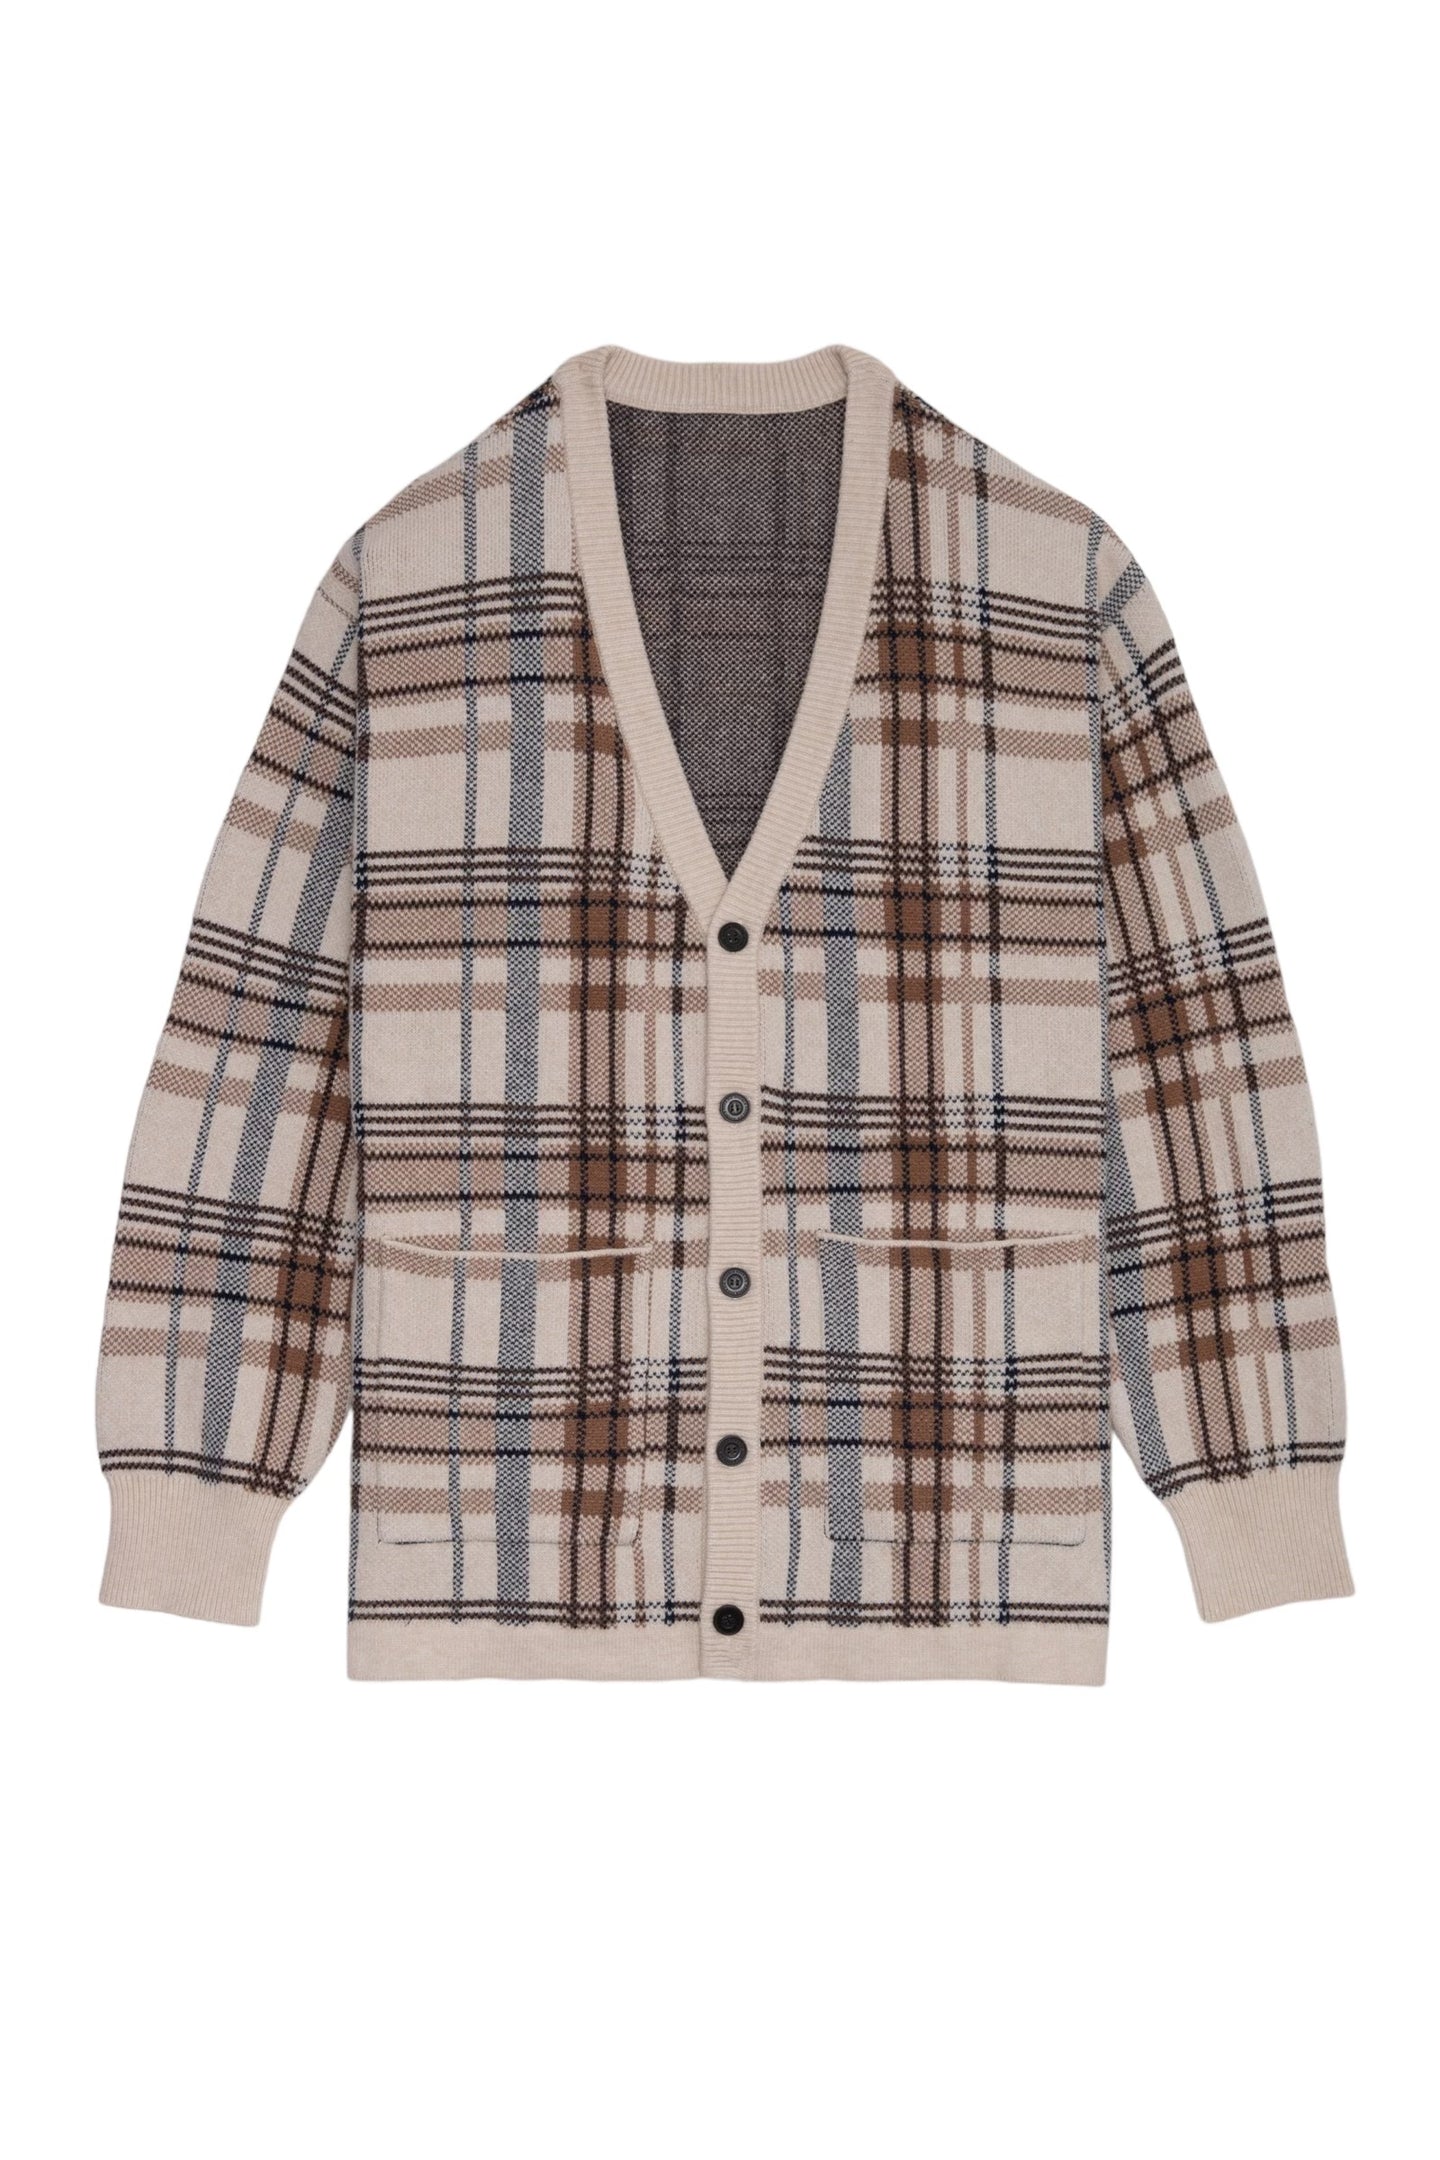 446-Leather Emblem Checked Knit Cardigan Beige Check